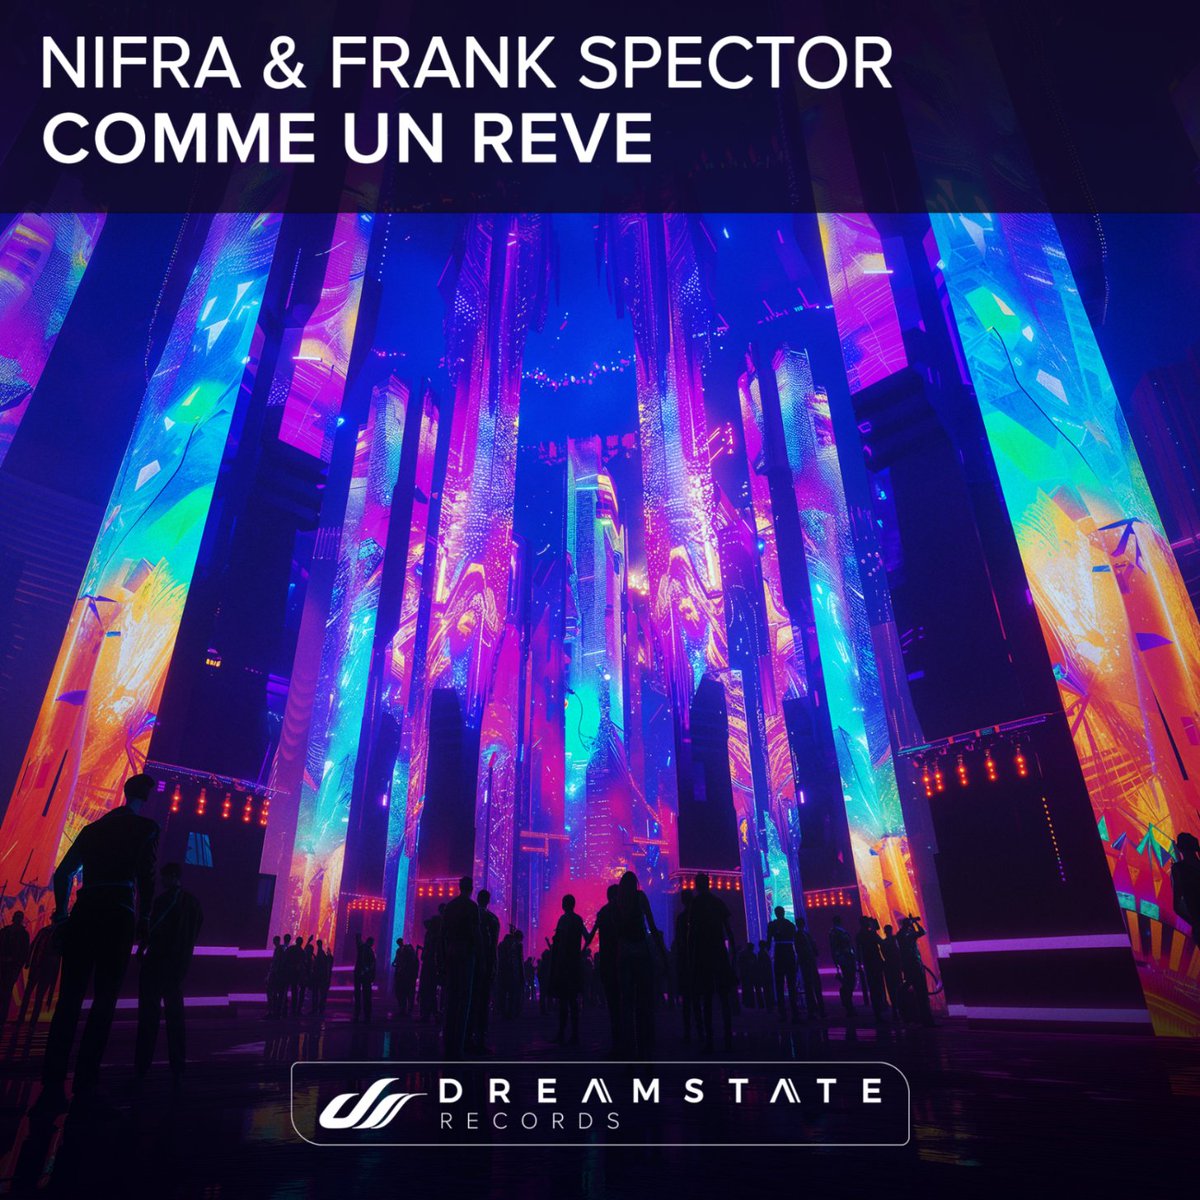 Drift away on a celestial voyage with @Nifra and Frank Spector’s newest track, “Come Un Reve” out this Friday on #DreamstateRecs! 🌟 Pre-Save HERE → drmst.cc/CommeUnReve ☁️